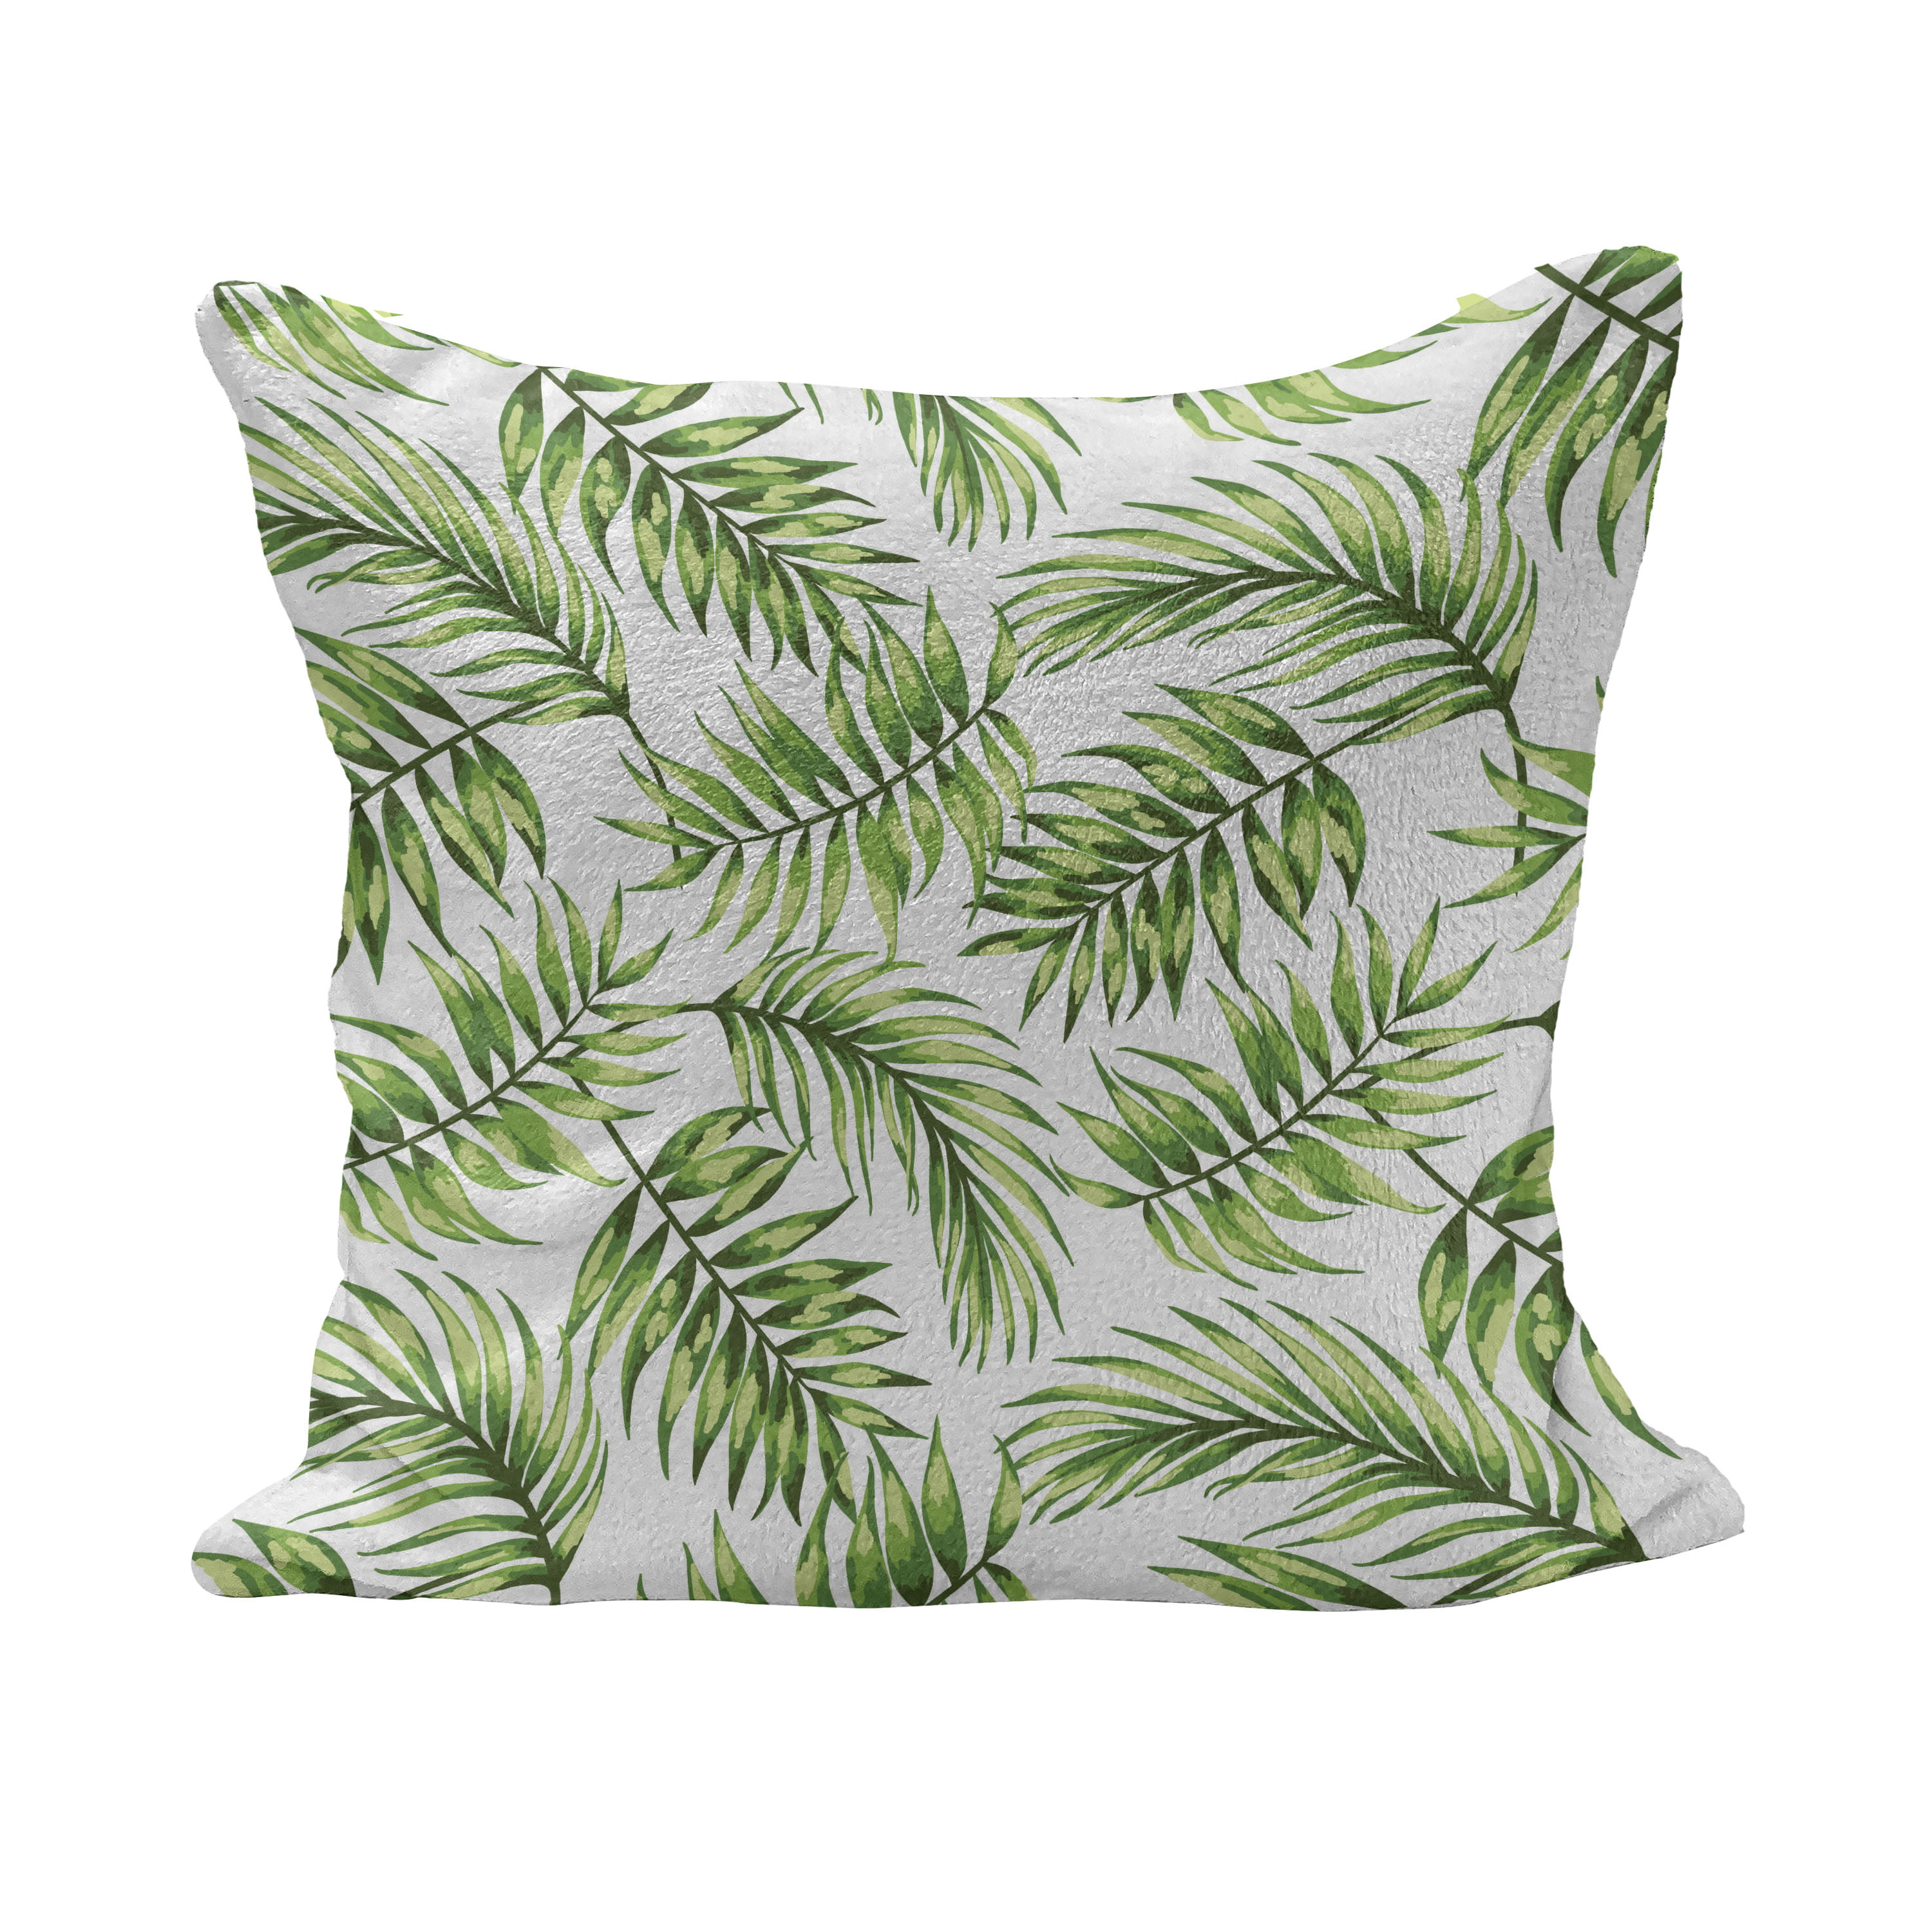 Multicolor Green Botanical Fern Gifts For Women Girls Men Blue Red Nature Flower Floral Throw Pillow 16x16